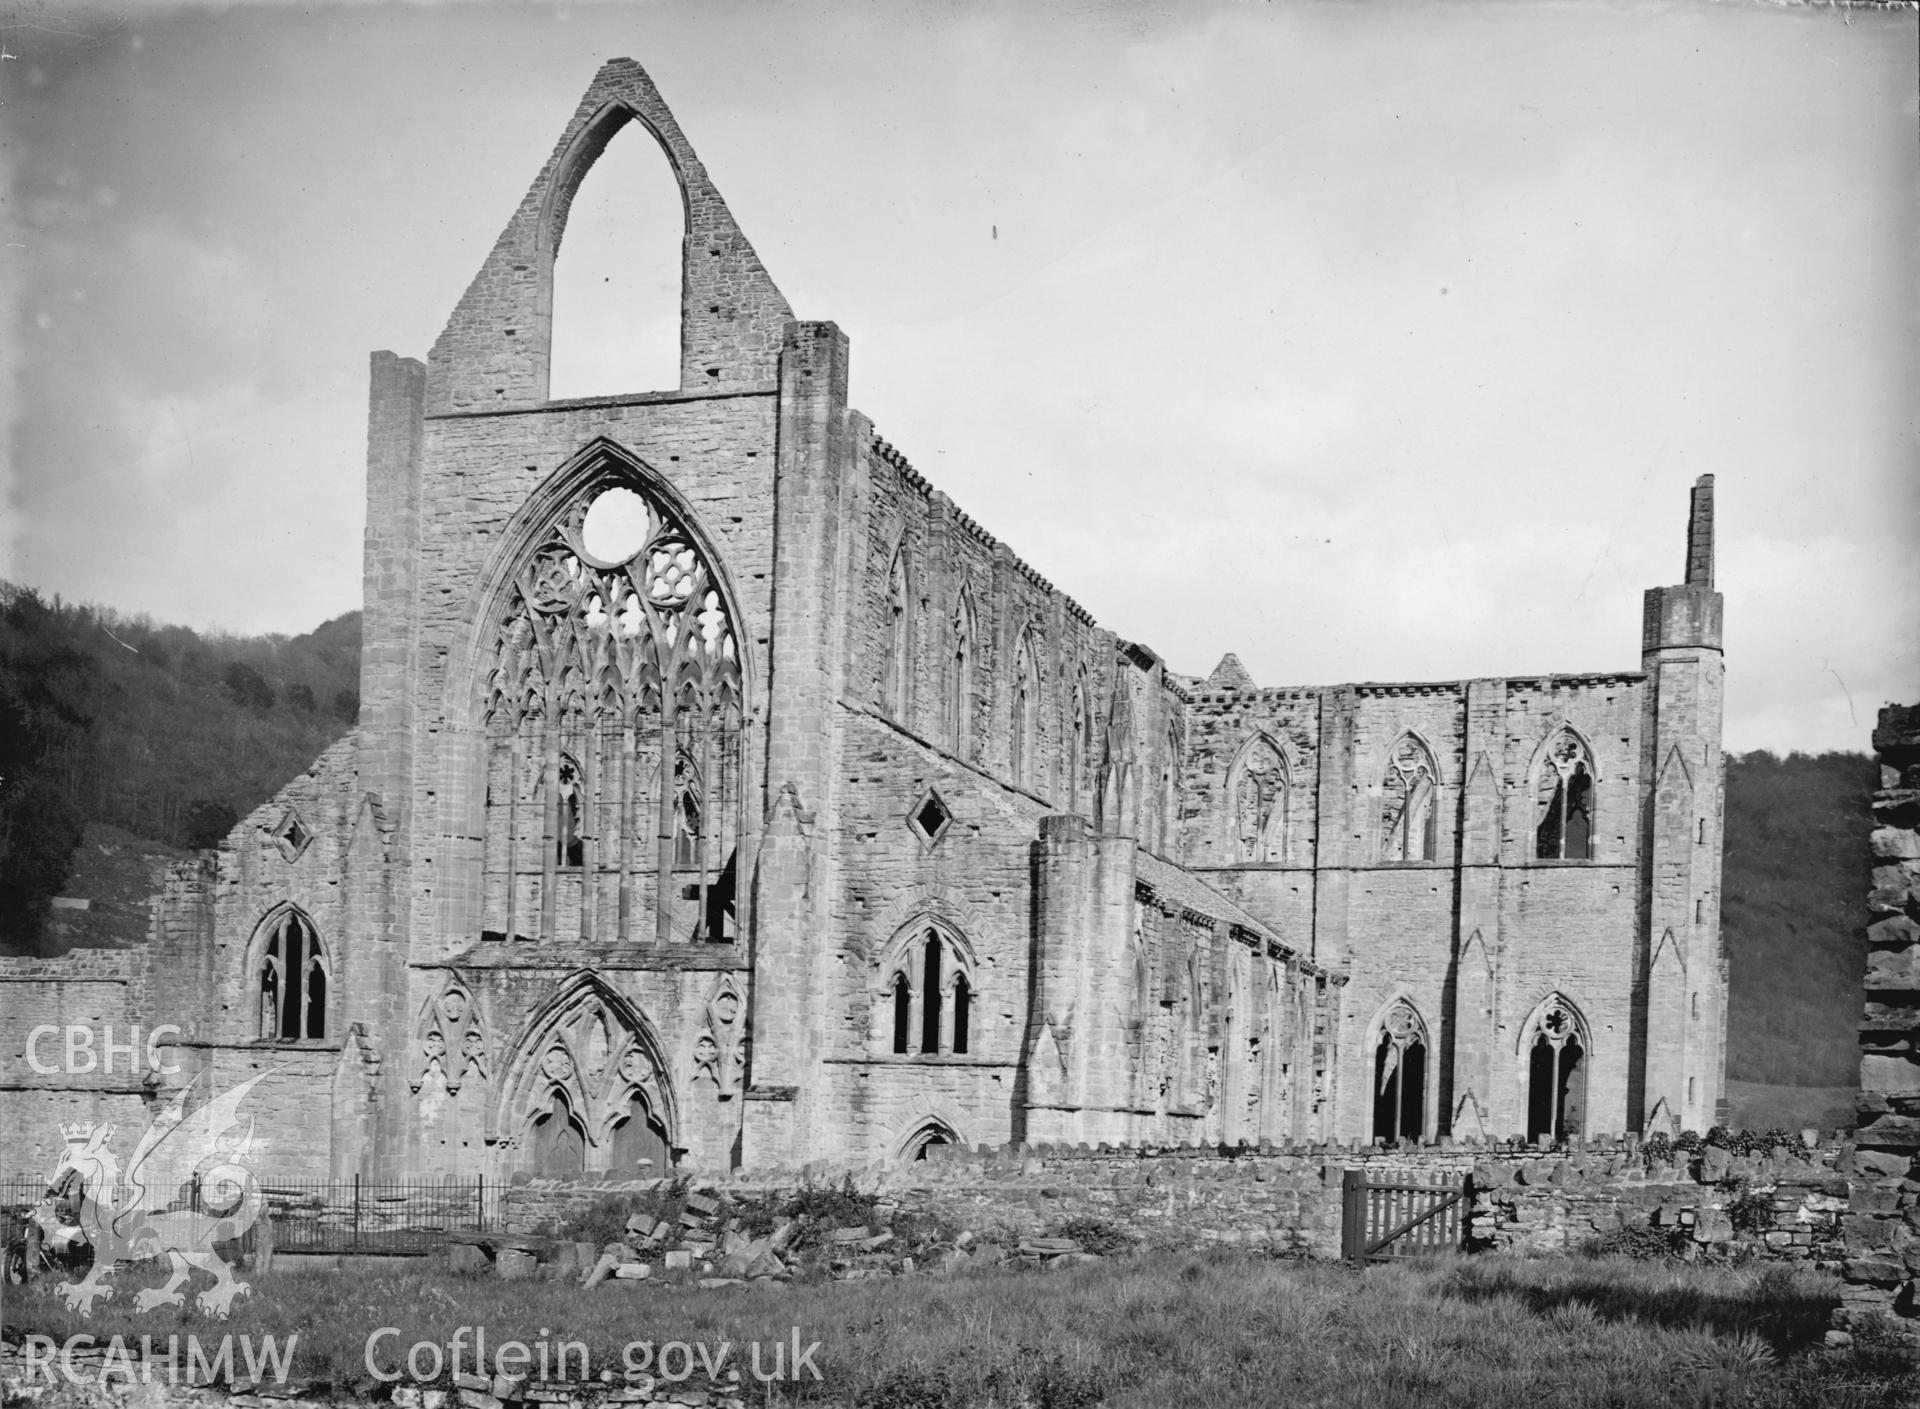 Digital copy of a photograph showing the west front of Tintern Abbey taken by F H Crossley.